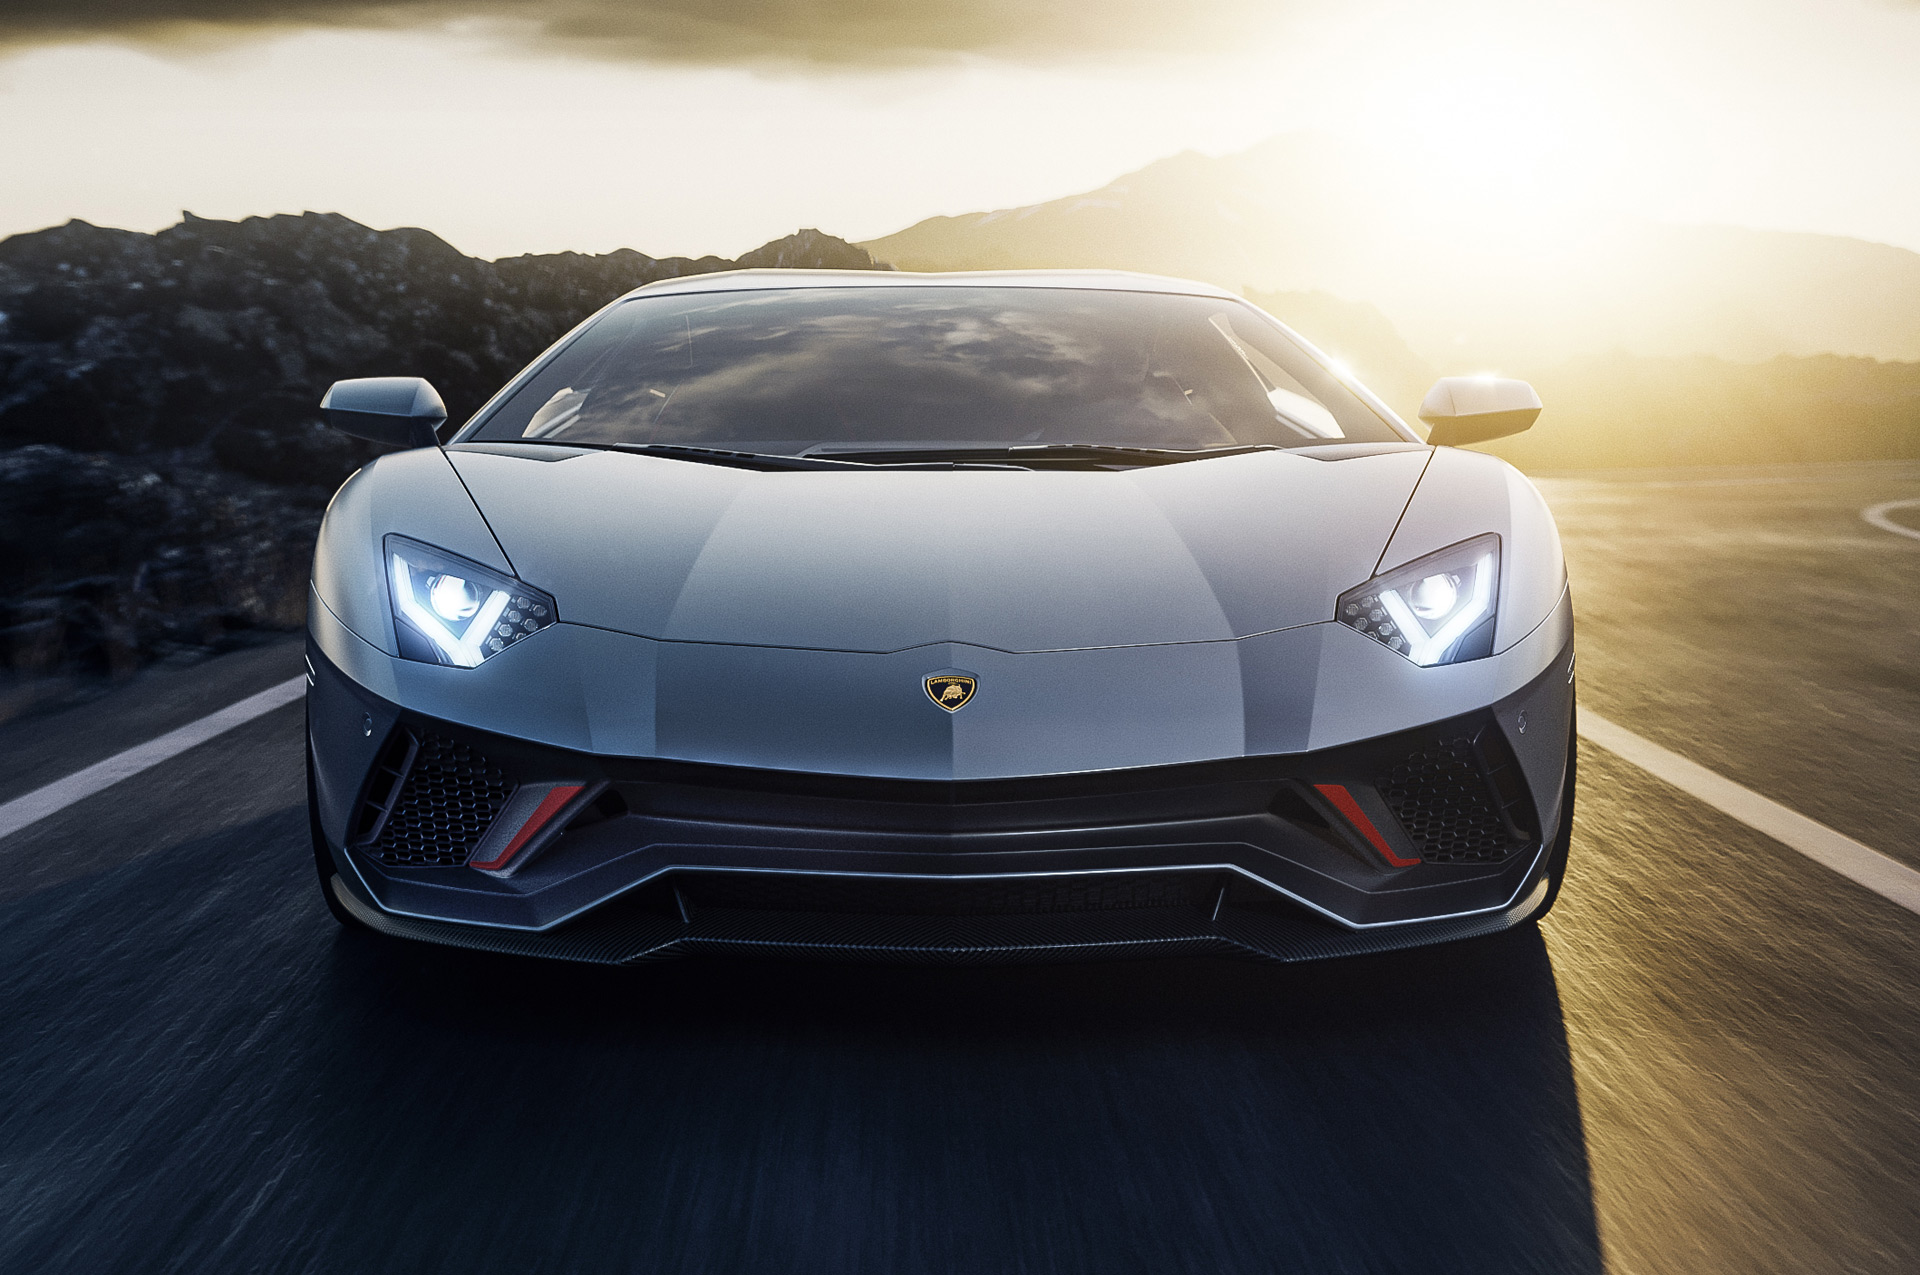 The 770 HP Aventador LP780 4 Ultimae Is The Swan Song For Lamborghini's Flagship Supercar